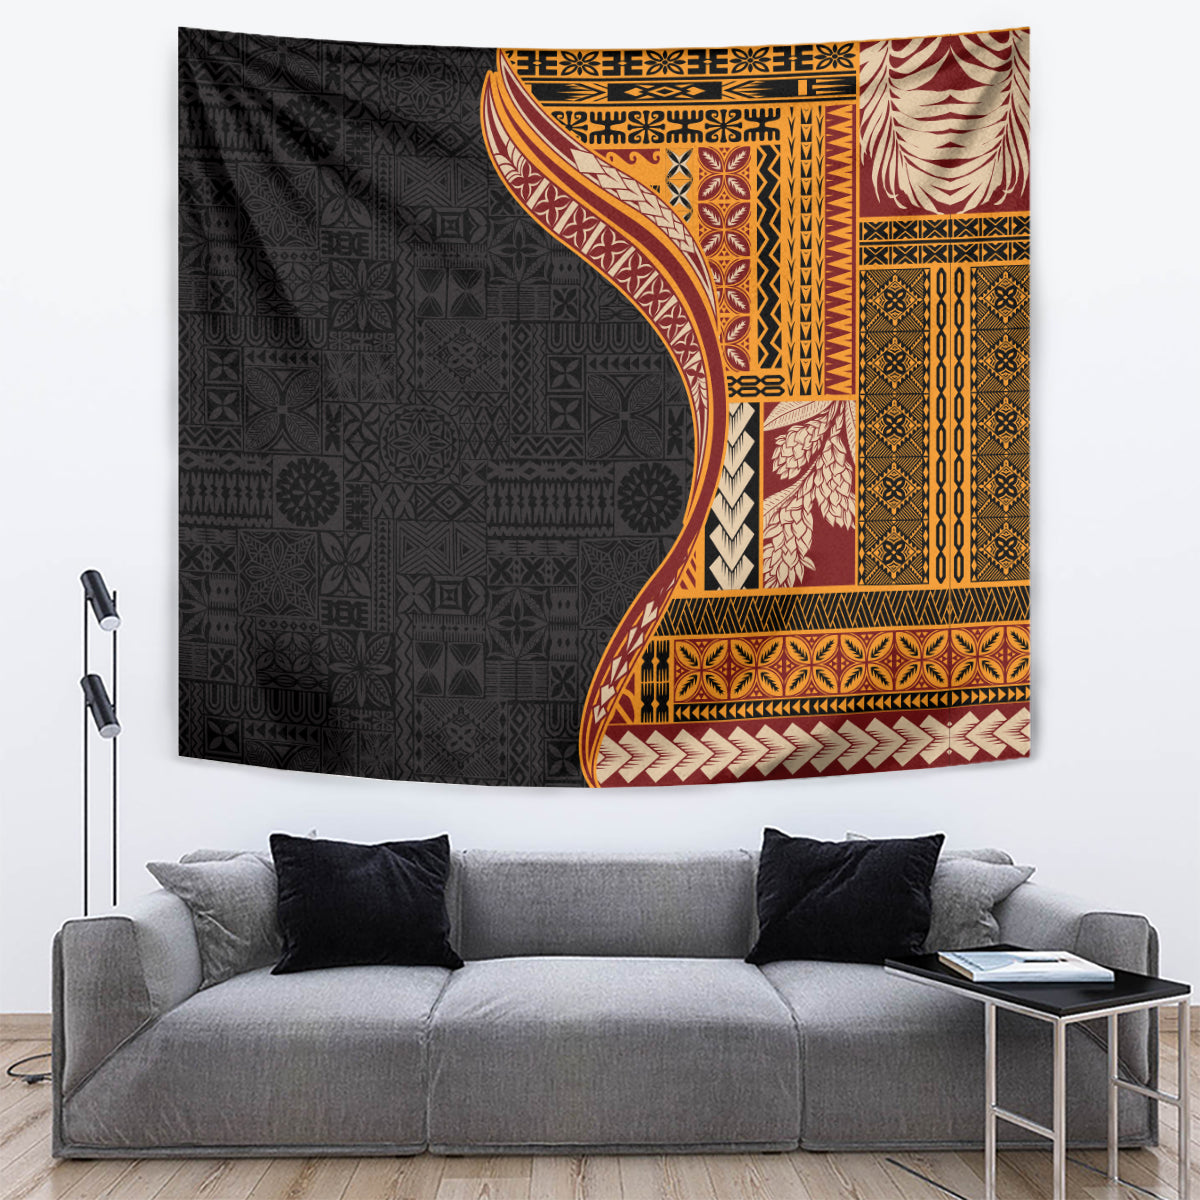 Samoa Siapo Motif and Tapa Pattern Half Style Tapestry Yellow Color